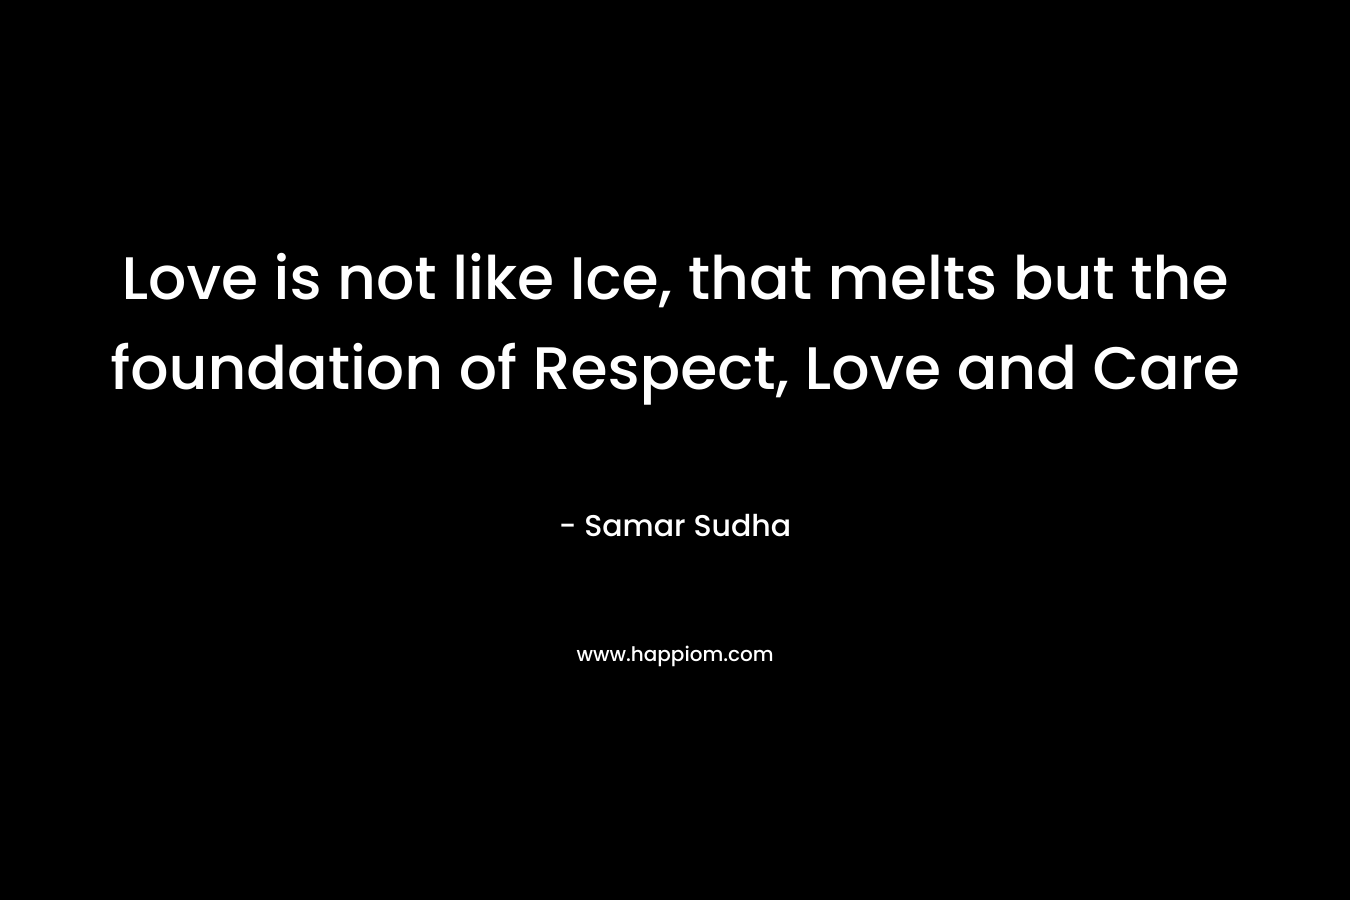 Love is not like Ice, that melts but the foundation of Respect, Love and Care